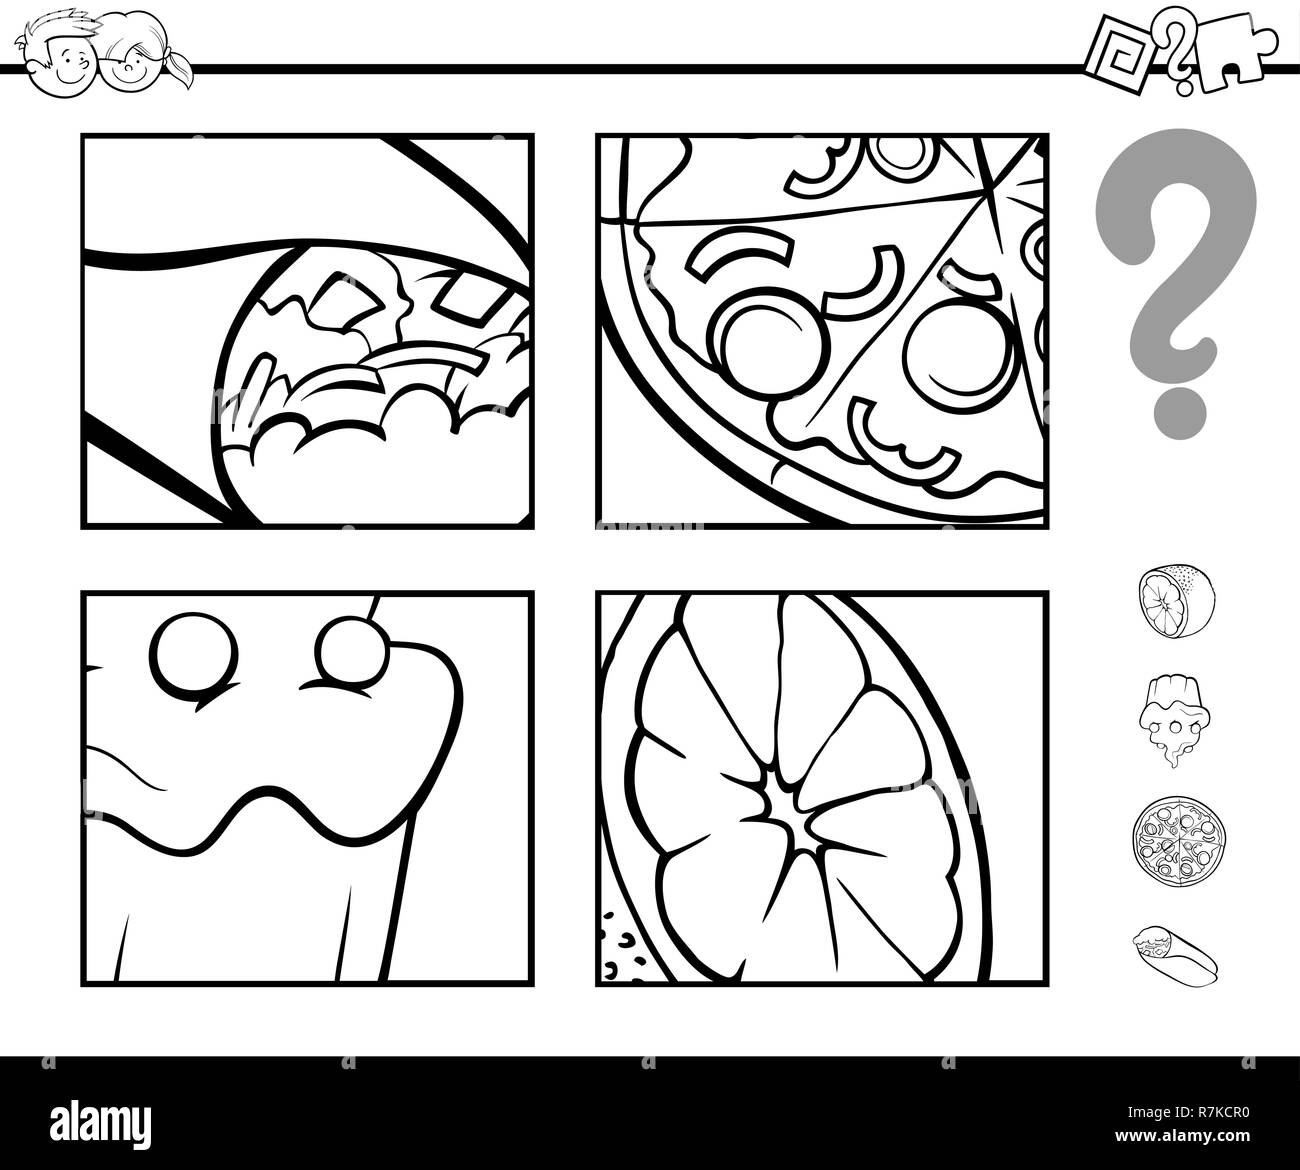 Black and White Cartoon Illustration of Educational Activity Game of Guessing Food Objects for Children Coloring Book Stock Vector